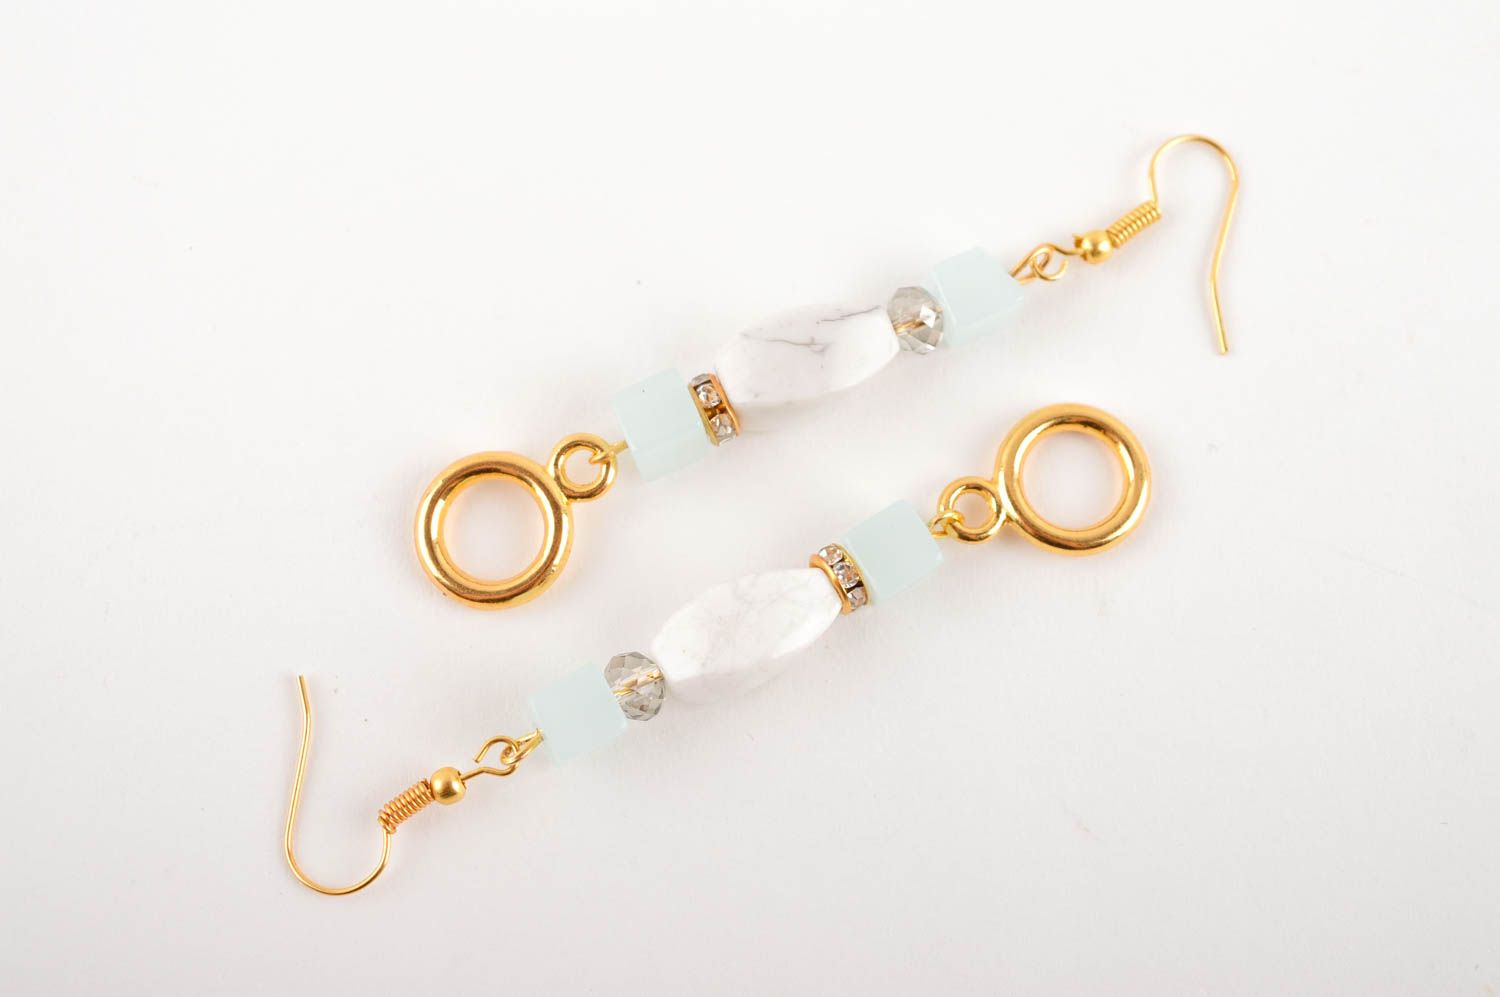 Handmade earrings with natural stones stylish accessories fashion jewelry photo 5